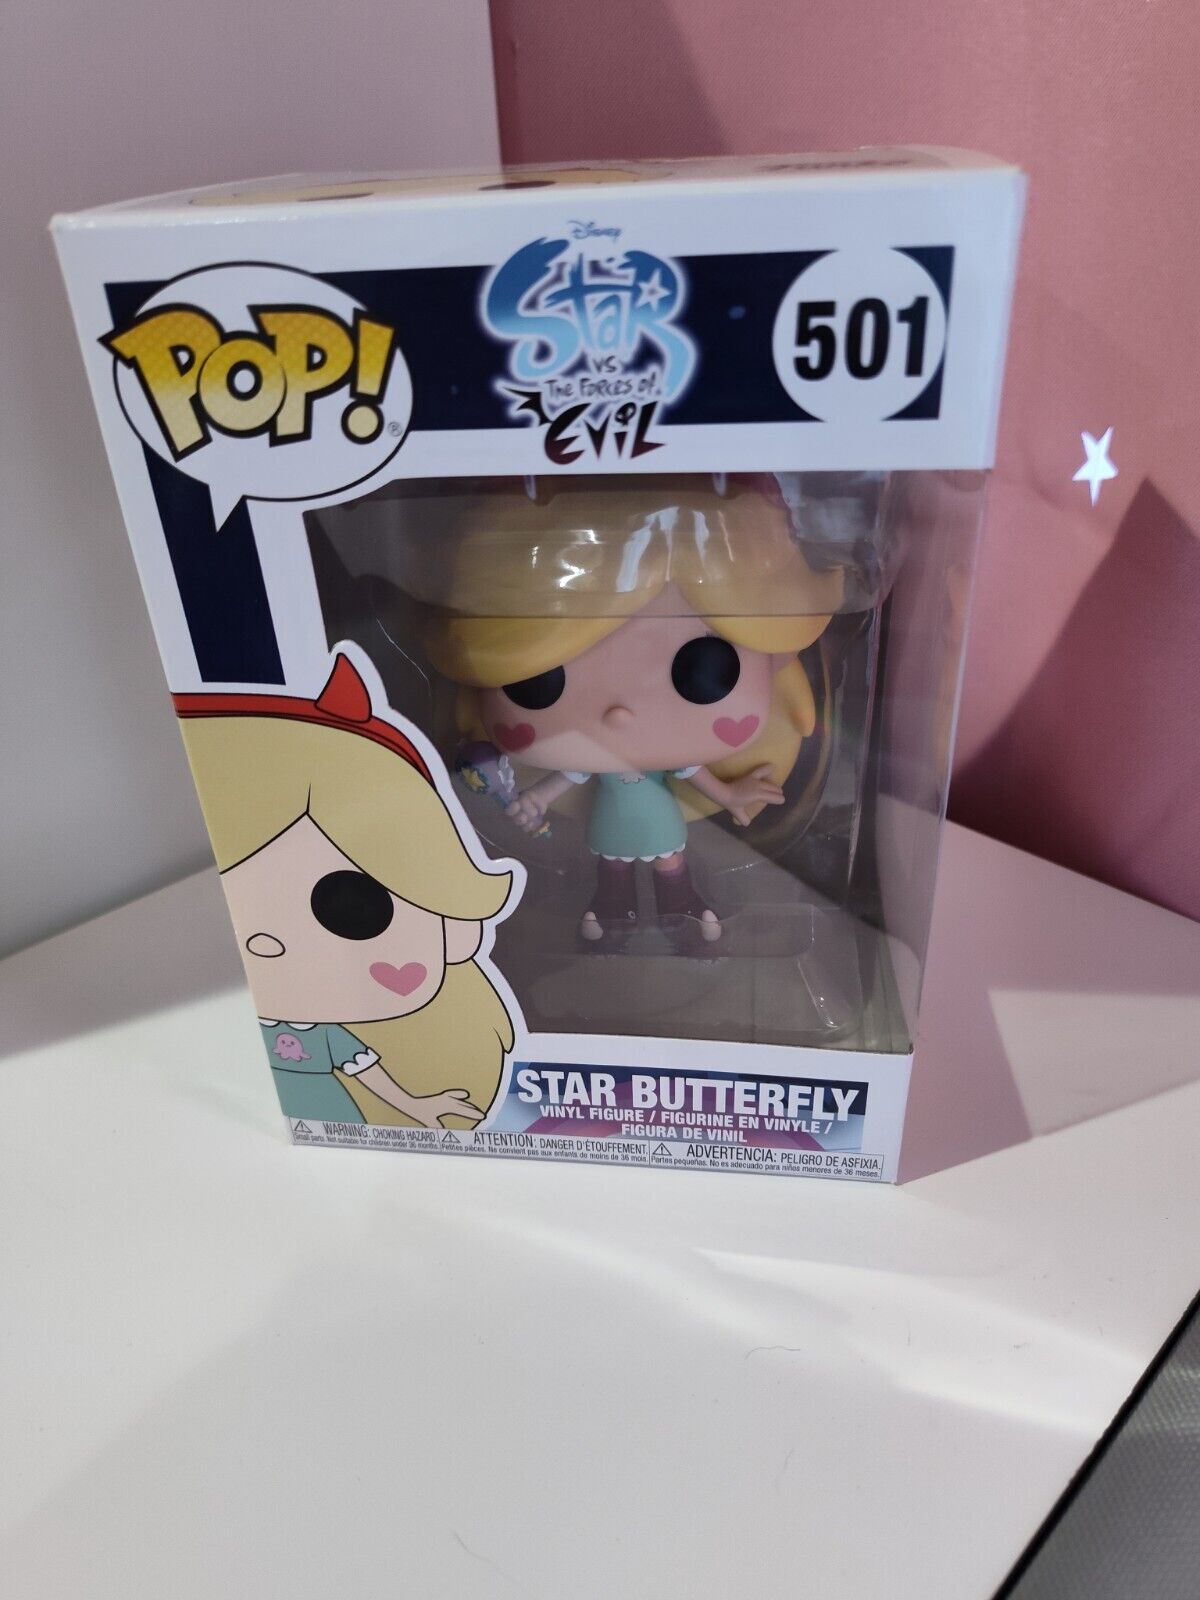 star vs the forces of evil funko pop Star butterfly 501